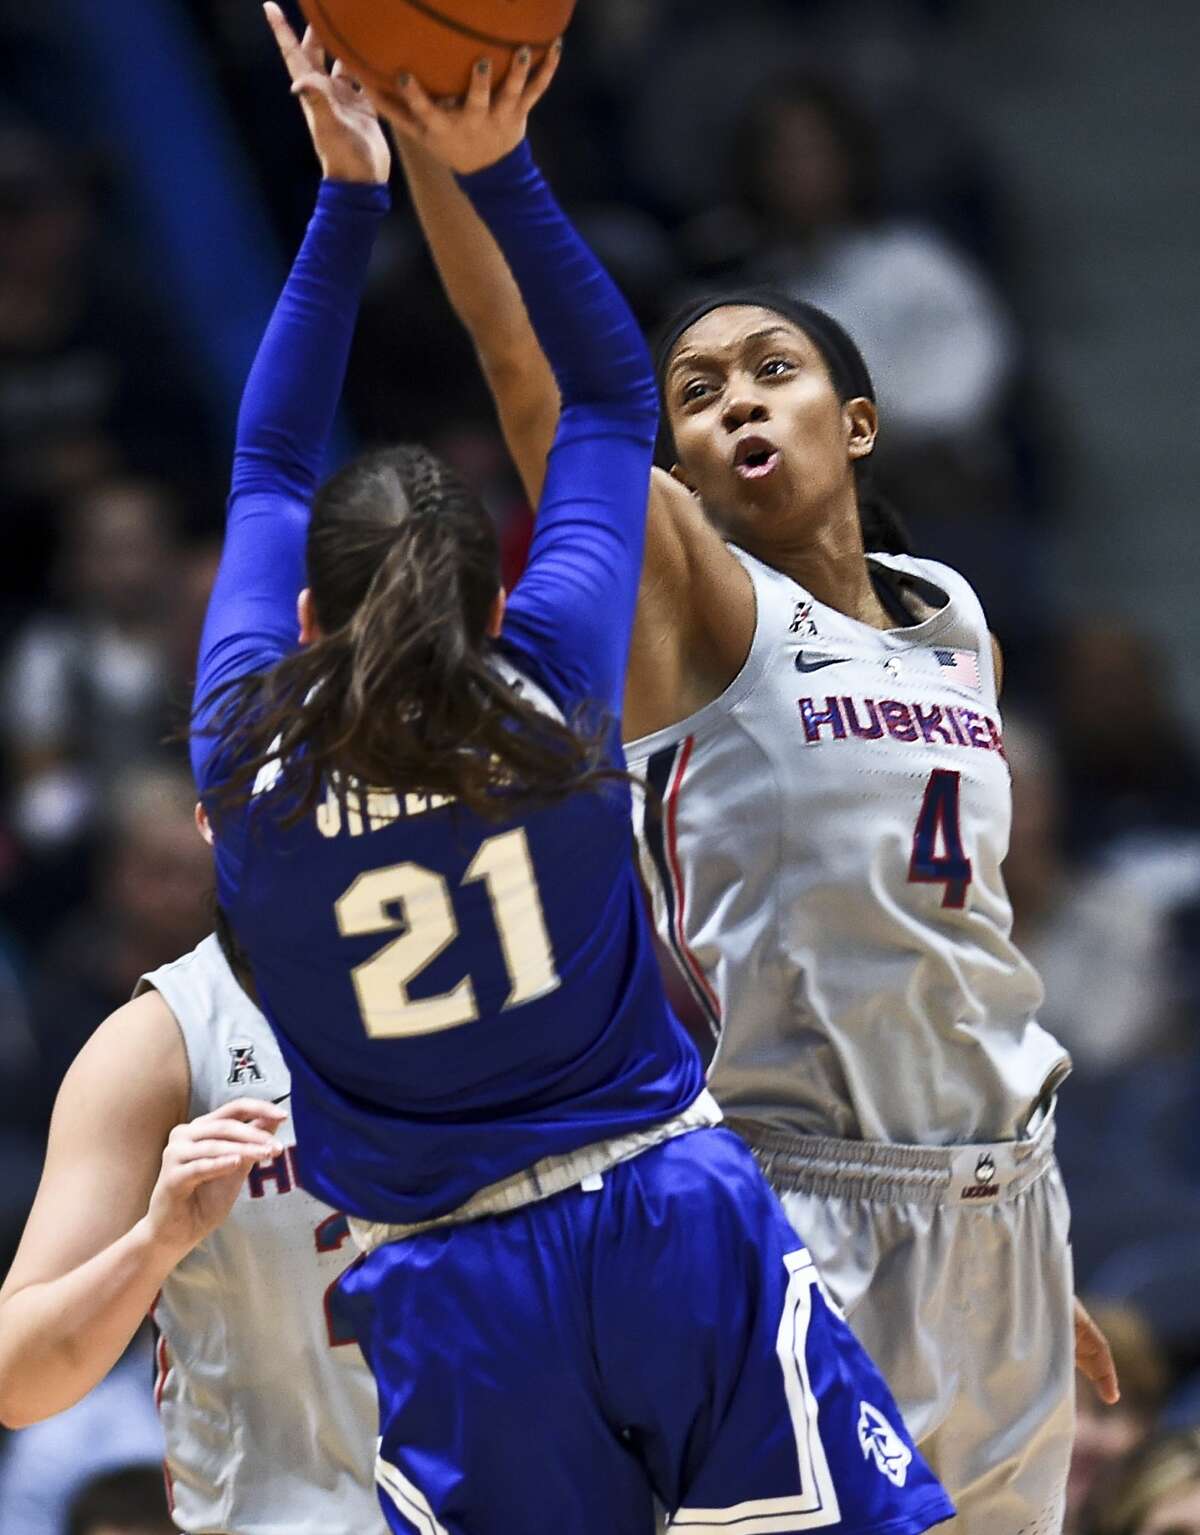 Connecticut's Mikayla Coombs (4) blocks a shot against Seton Hall's Nicole Jimenez (21) in the second half of an NCAA college basketball game, Saturday, Dec. 8, 2018, in Hartford, Conn. UConn won 99-61. (AP Photo/Stephen Dunn)